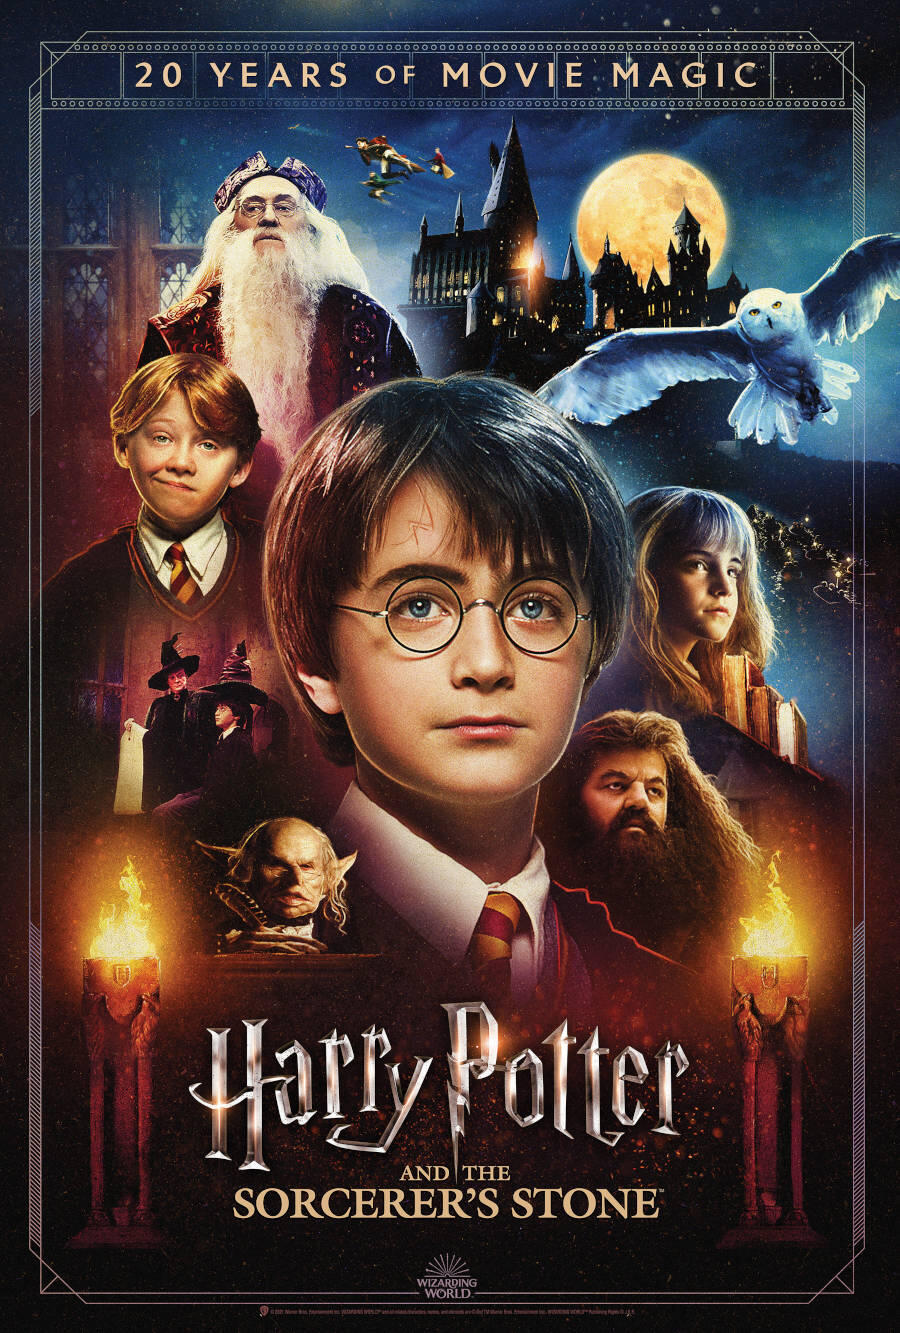 All The Harry Potter Movies In Order, From Sorcerer's Stone To